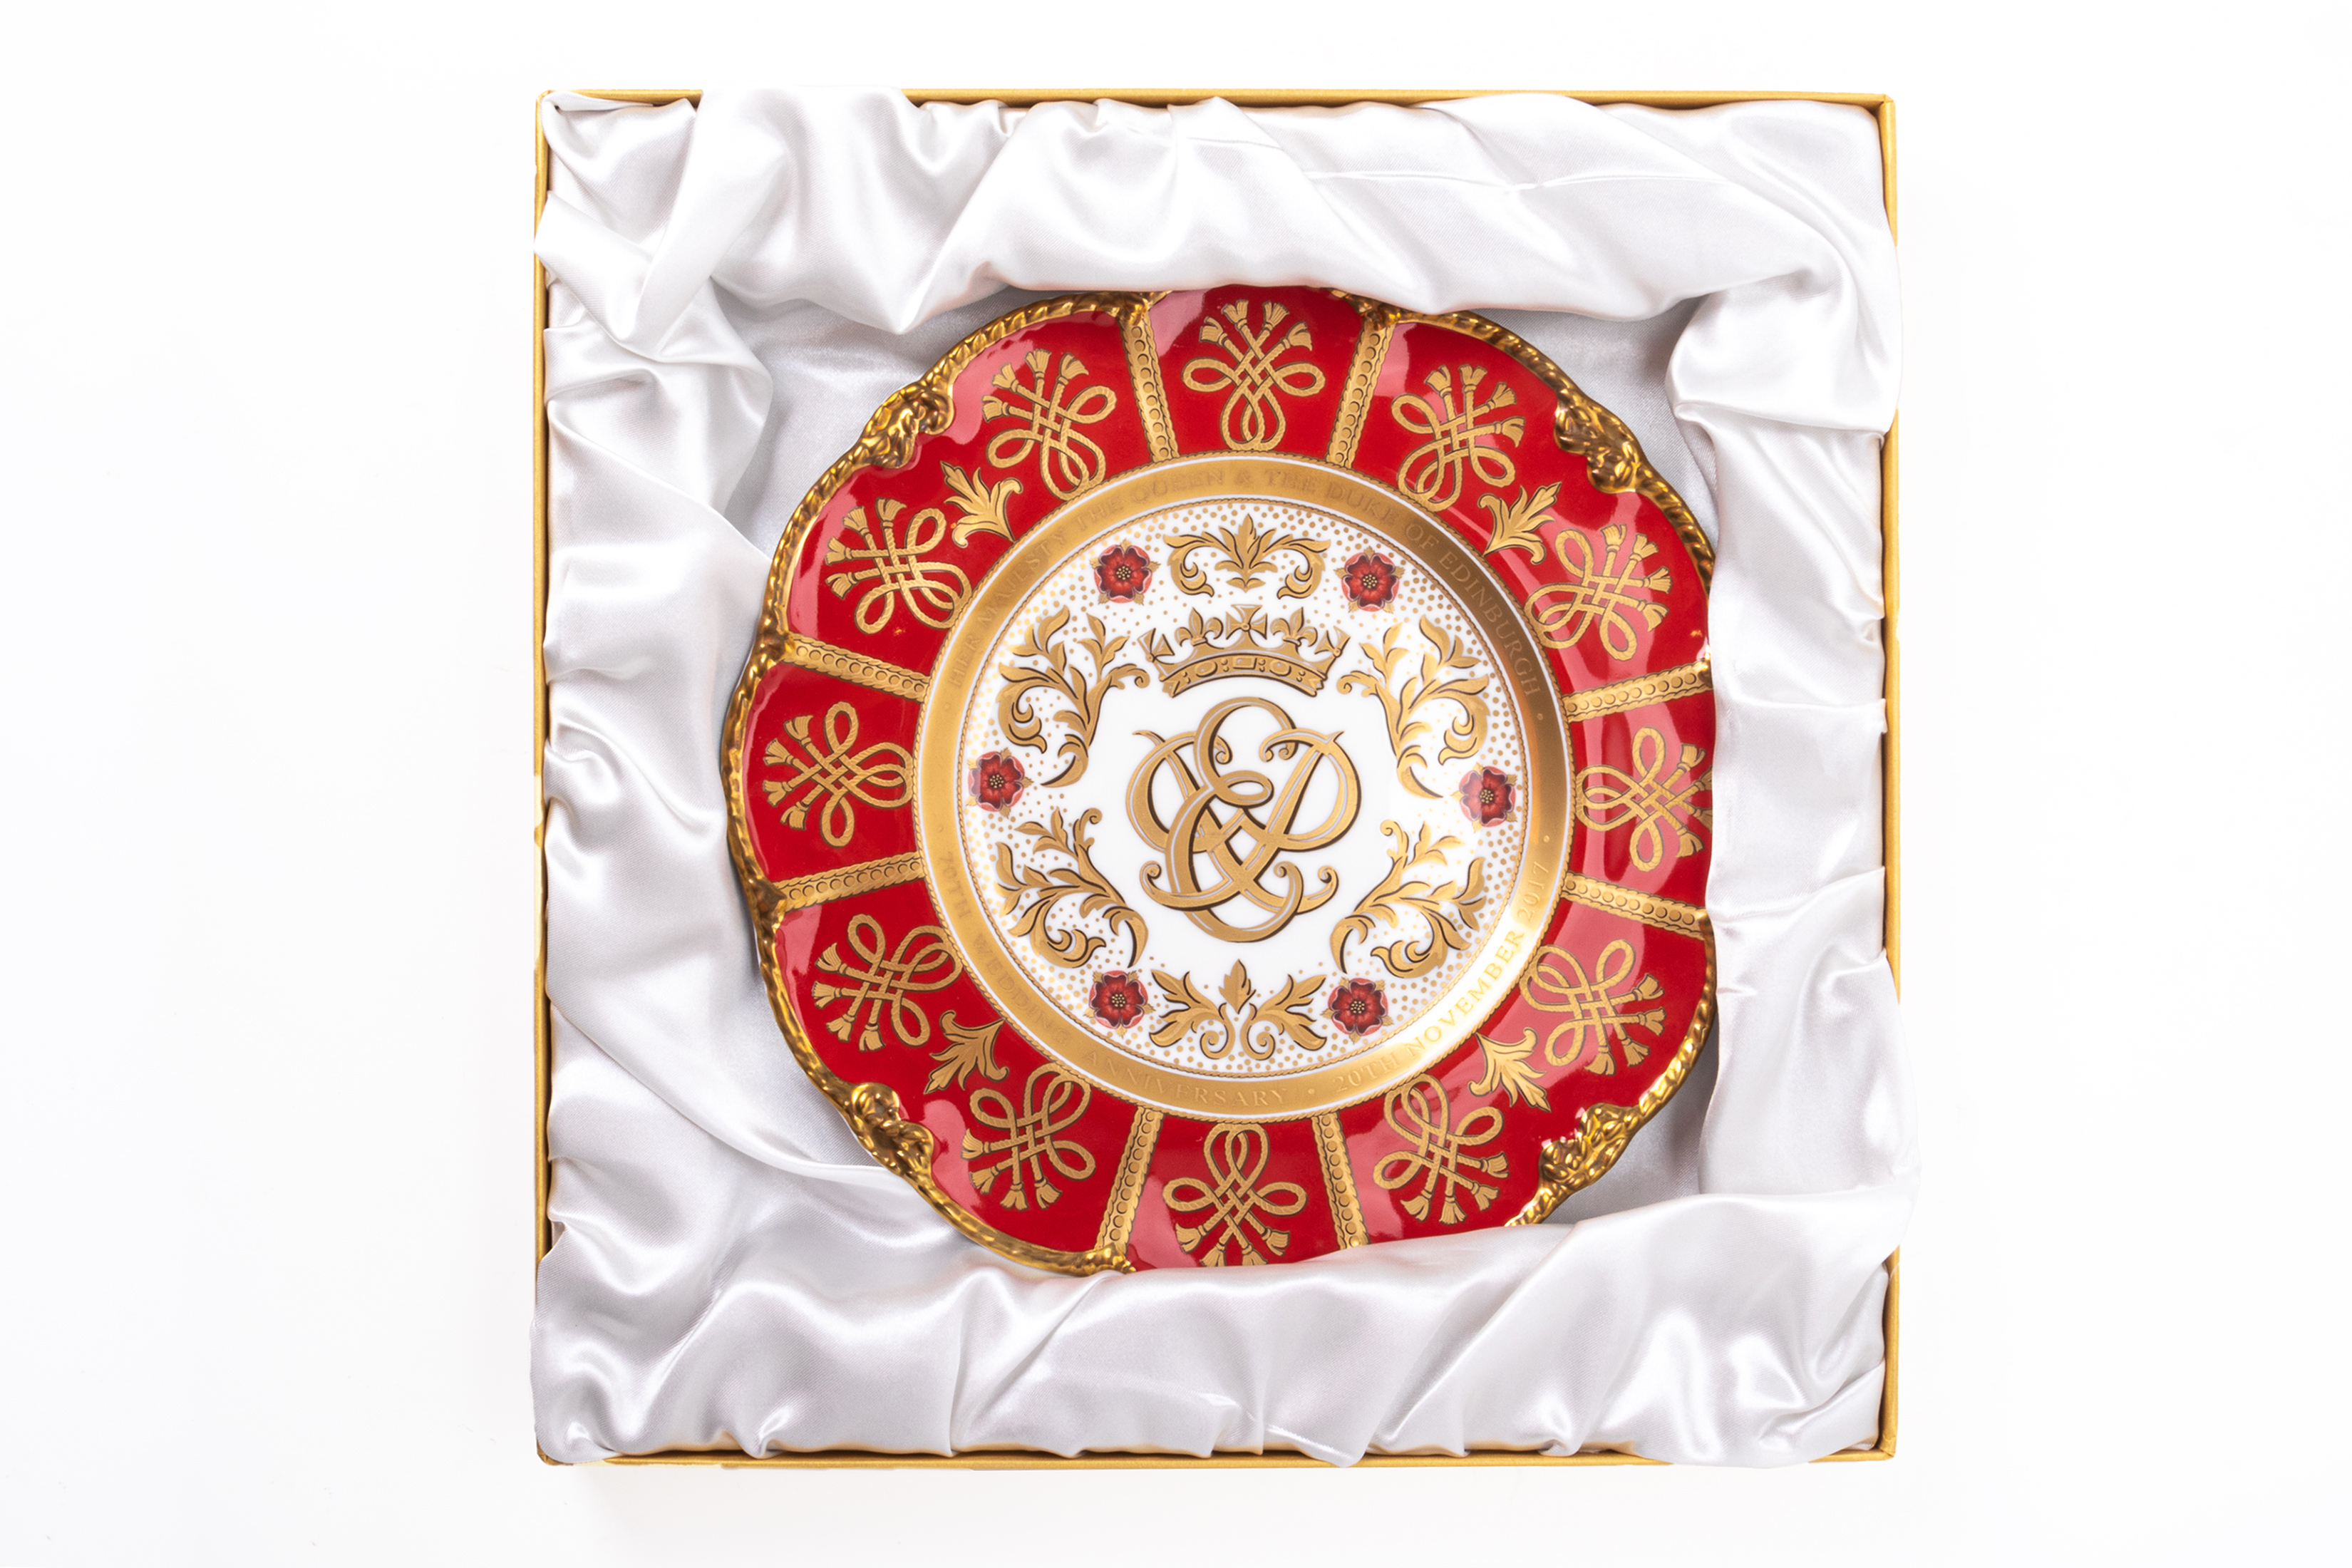 A QUEEN ELIZABETH II AND PRINCE PHILIP COMMEMORATIVE PLATE - Image 2 of 5